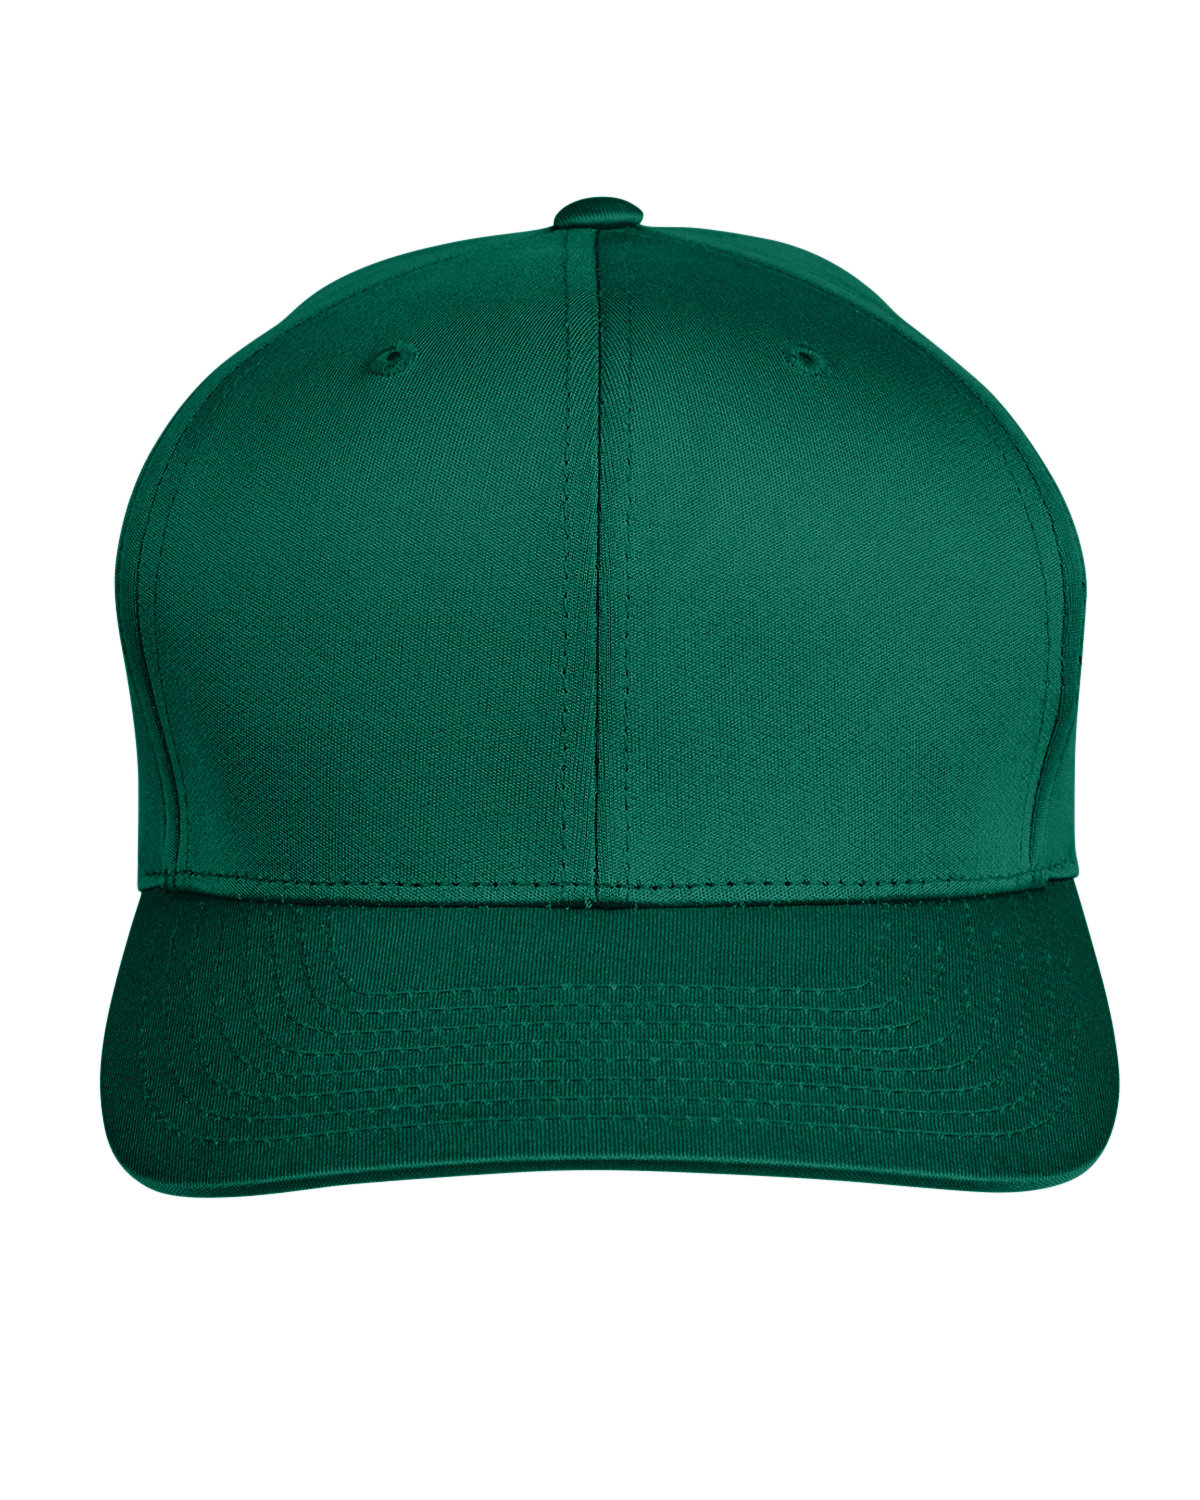 Team 365 by Yupoong® Adult Zone Performance Cap SPORT FOREST 